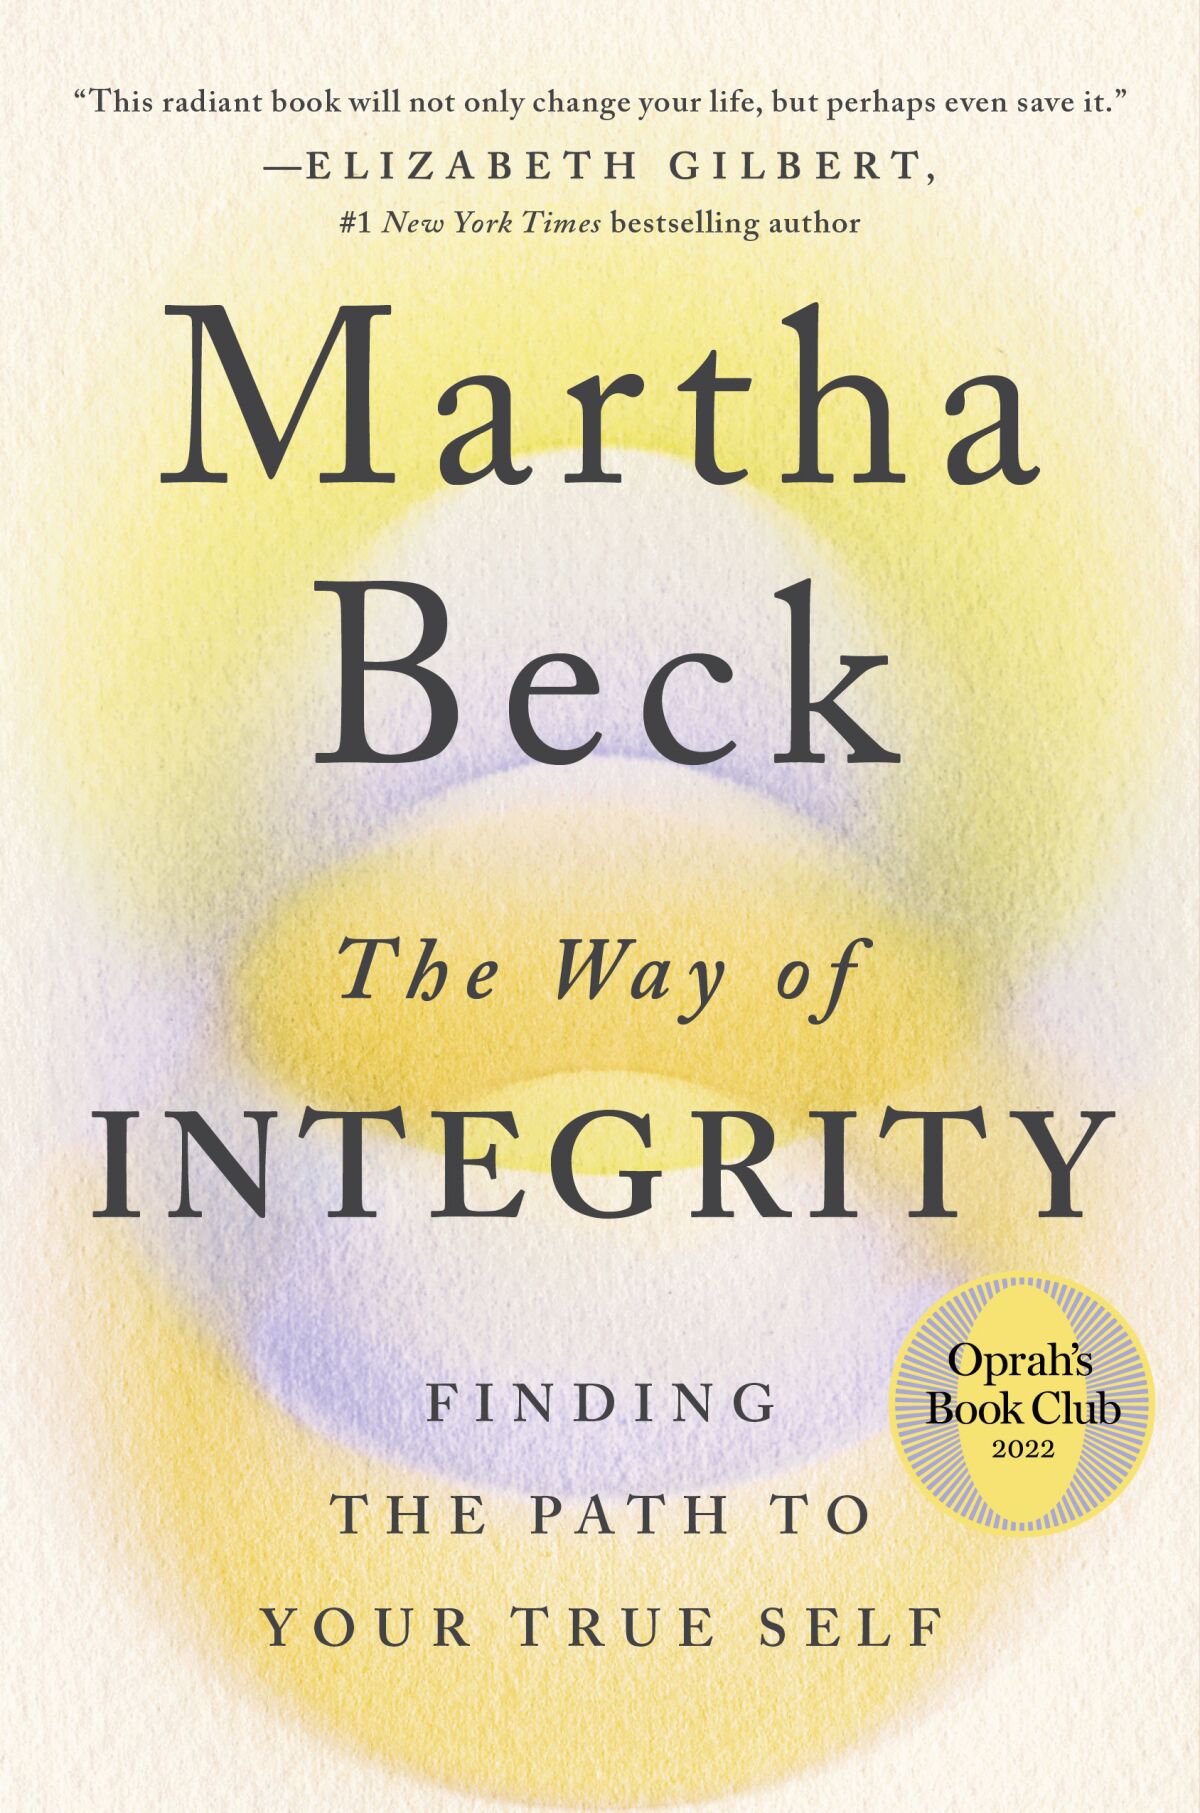 This book cover image released by The Open Field shows "The Way of Integrity: Finding the Path to Your True Self" by Martha Beck. (The Open Field via AP)